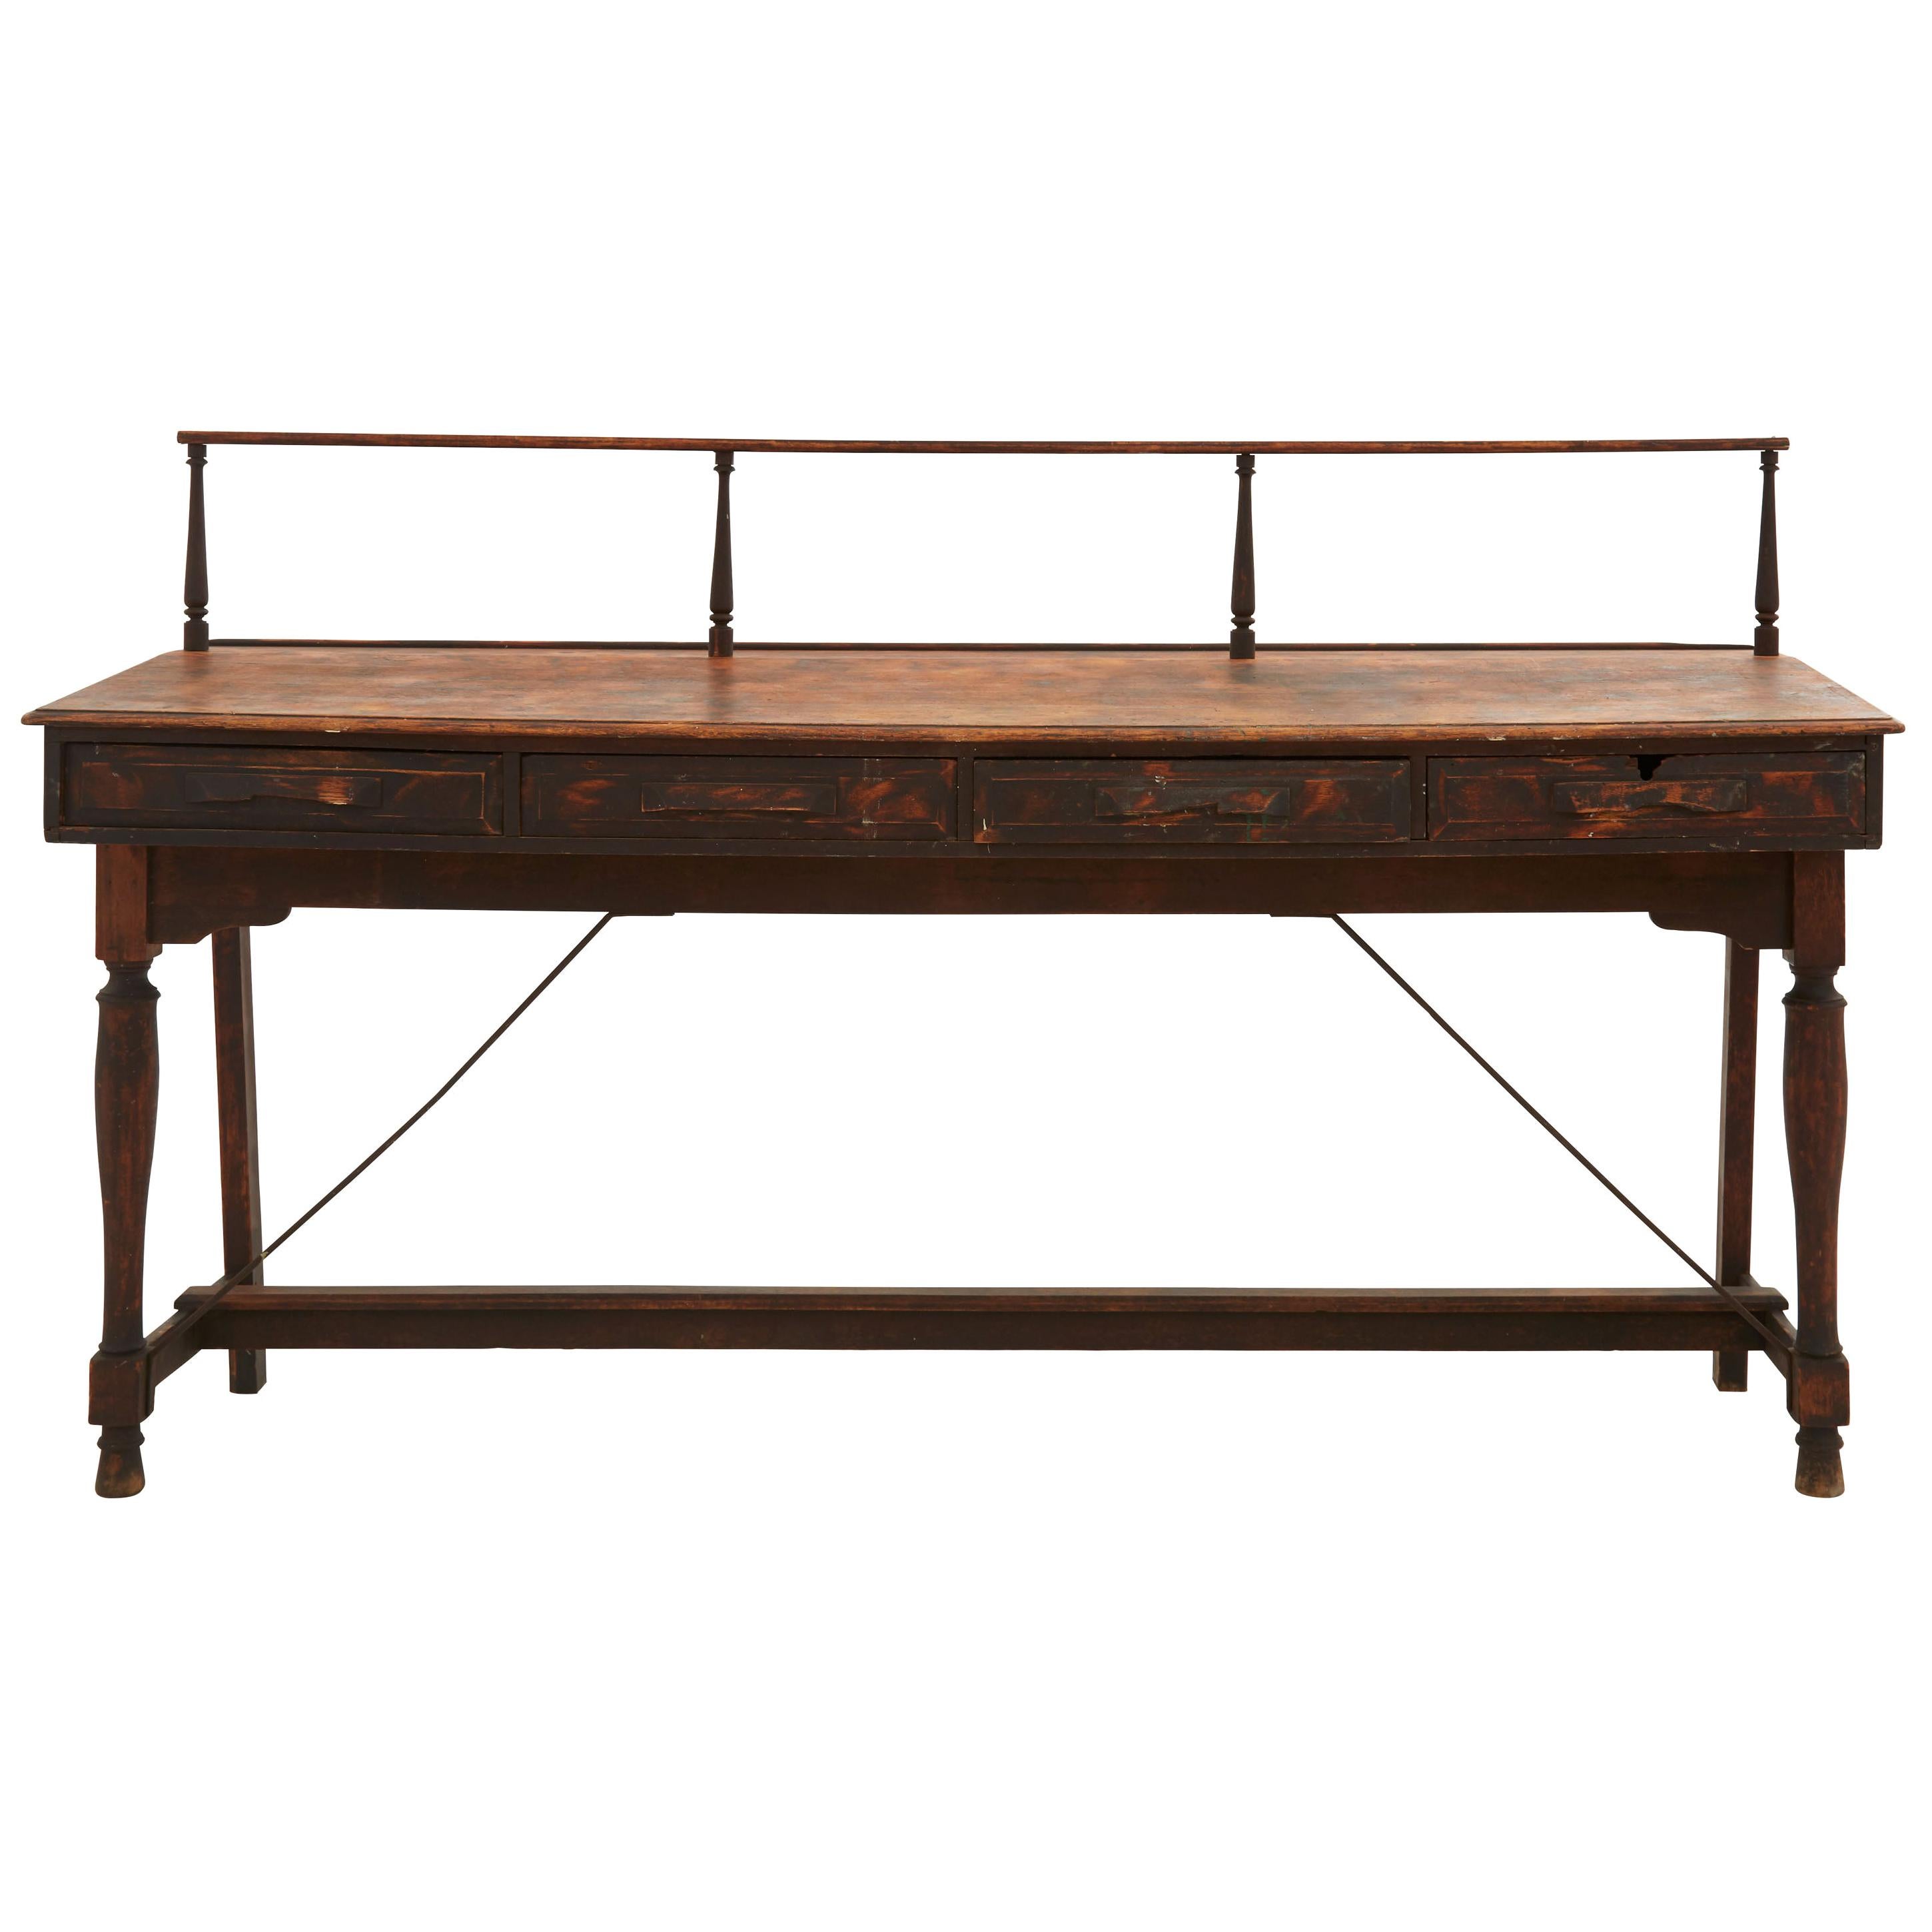 Early 20th Century Patinaed Wood Bank Desk